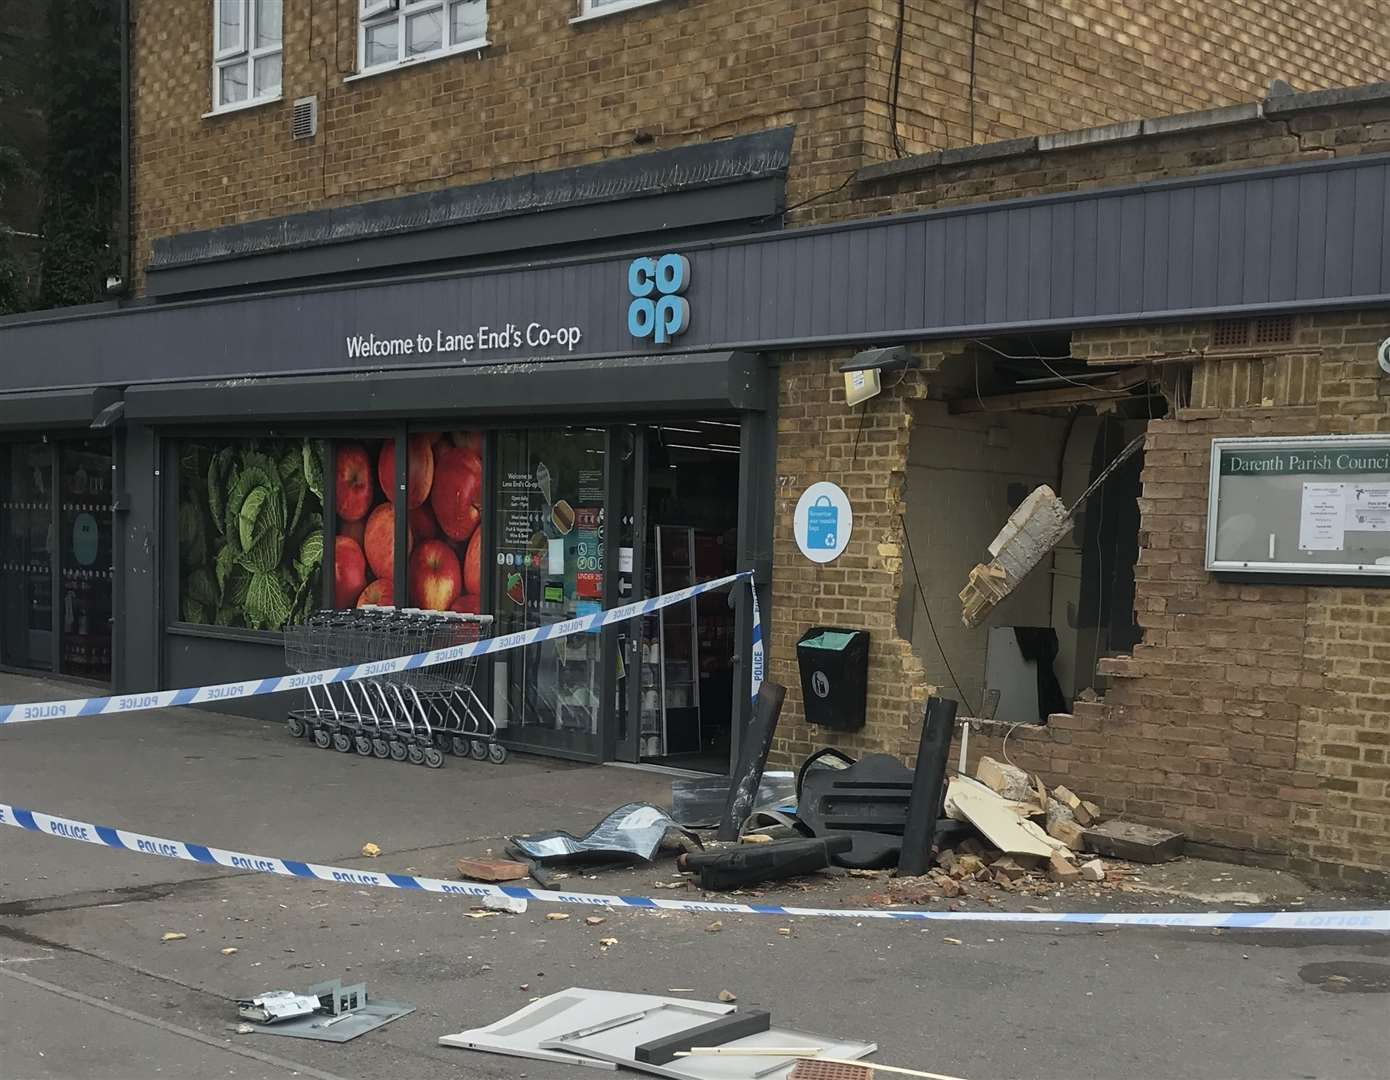 Ram-raiders have struck at a Co-Op in Lane End near Darenth (13635240)